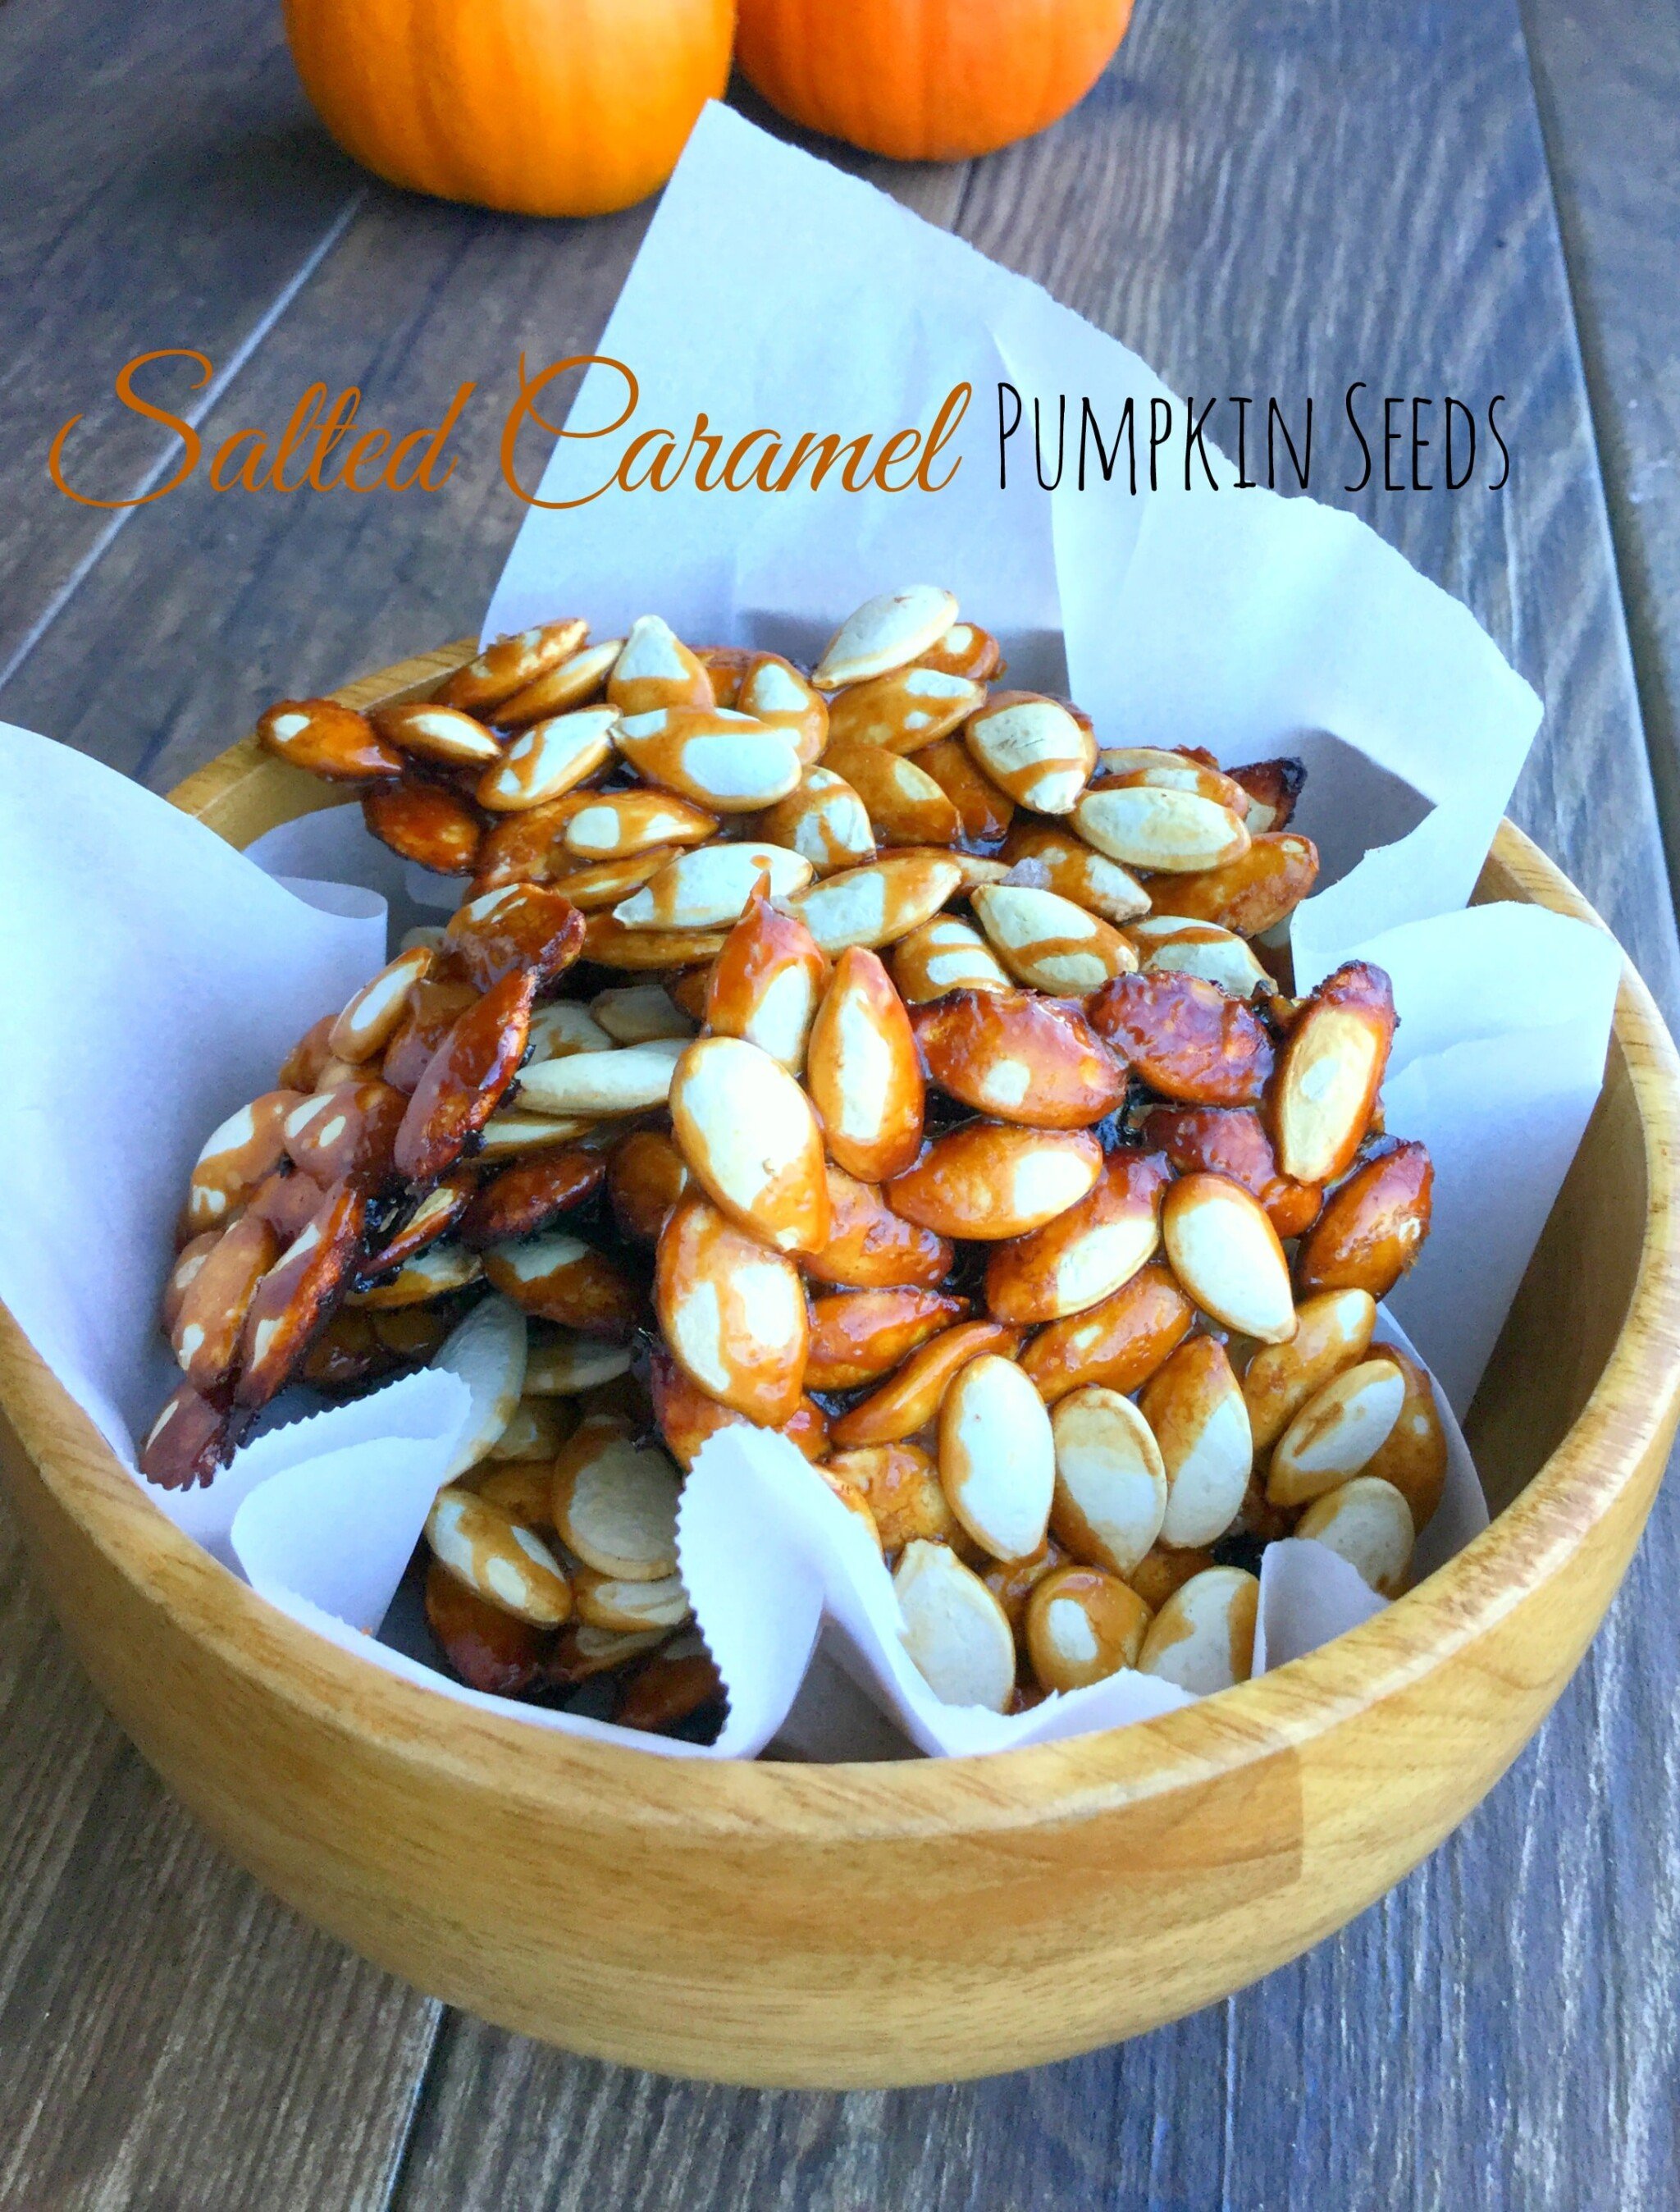 This sweet and salty pumpkin seeds recipe is a fun spin on this classic family recipe.